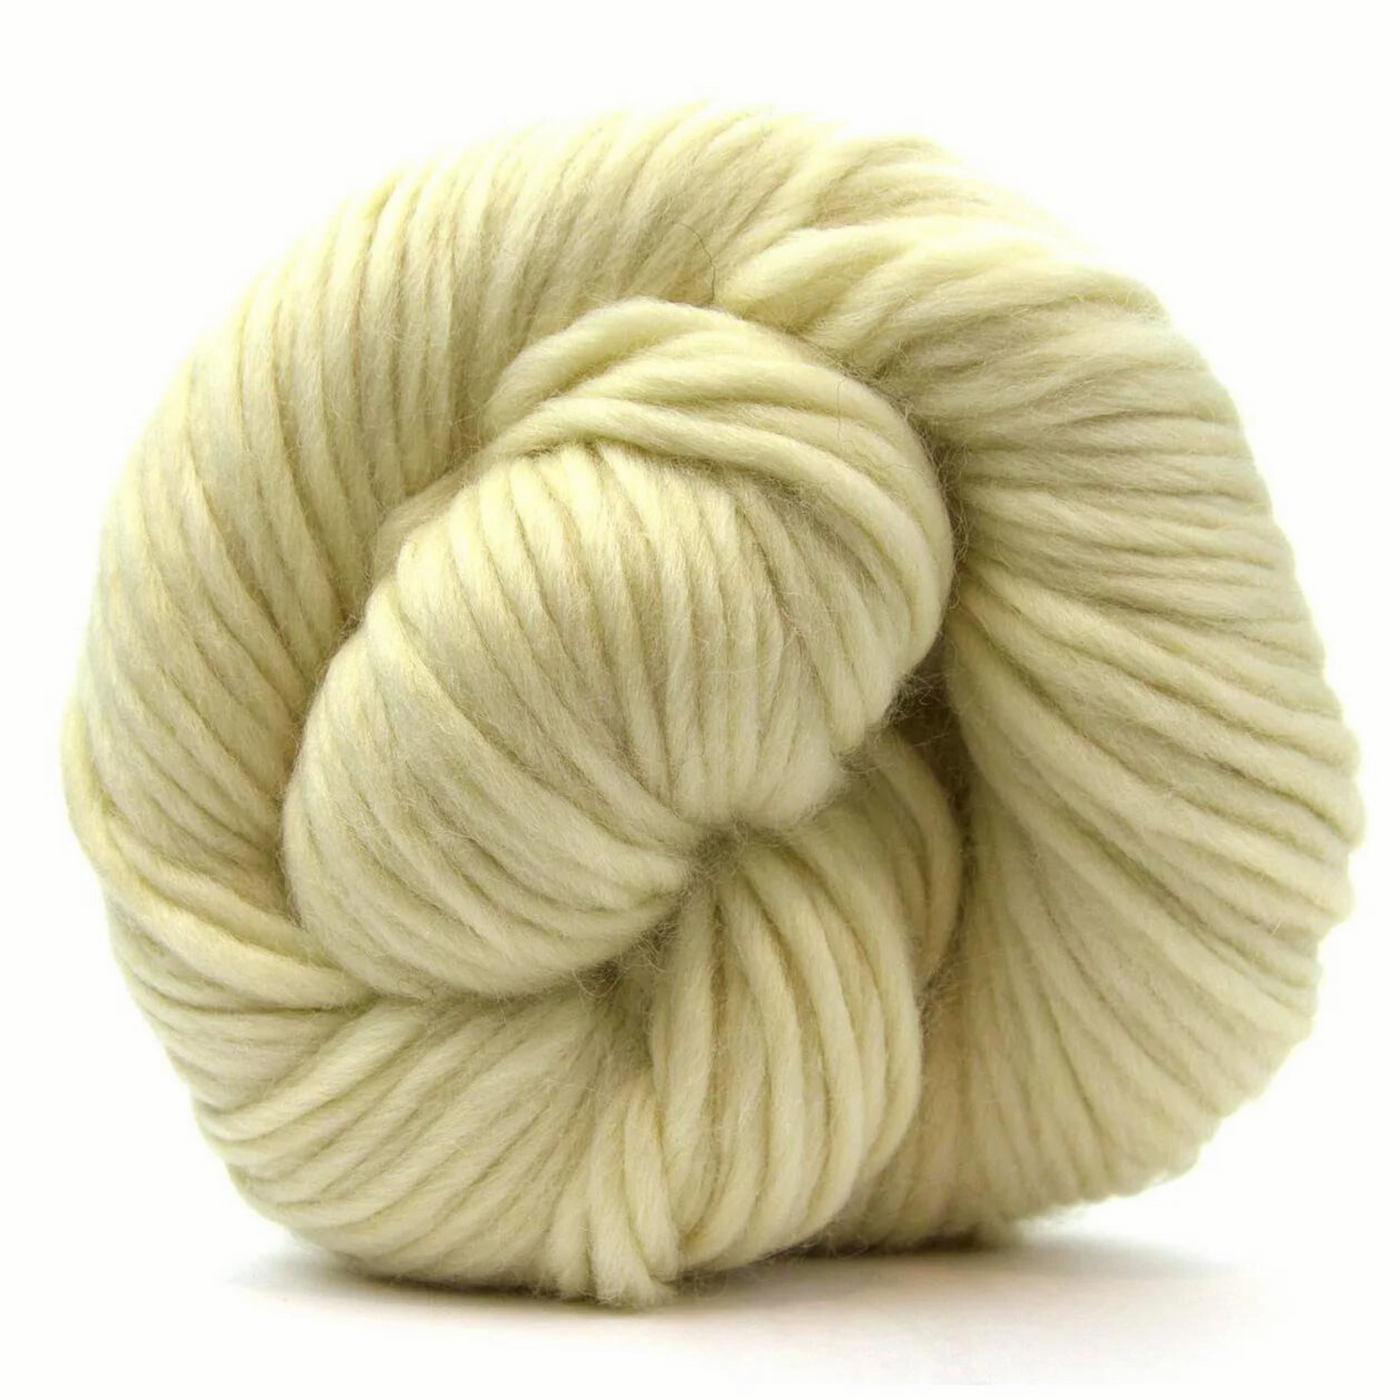 Super Bulky Undyed Corriedale Wool Yarn - 200 Grams, Approx 140 Yards